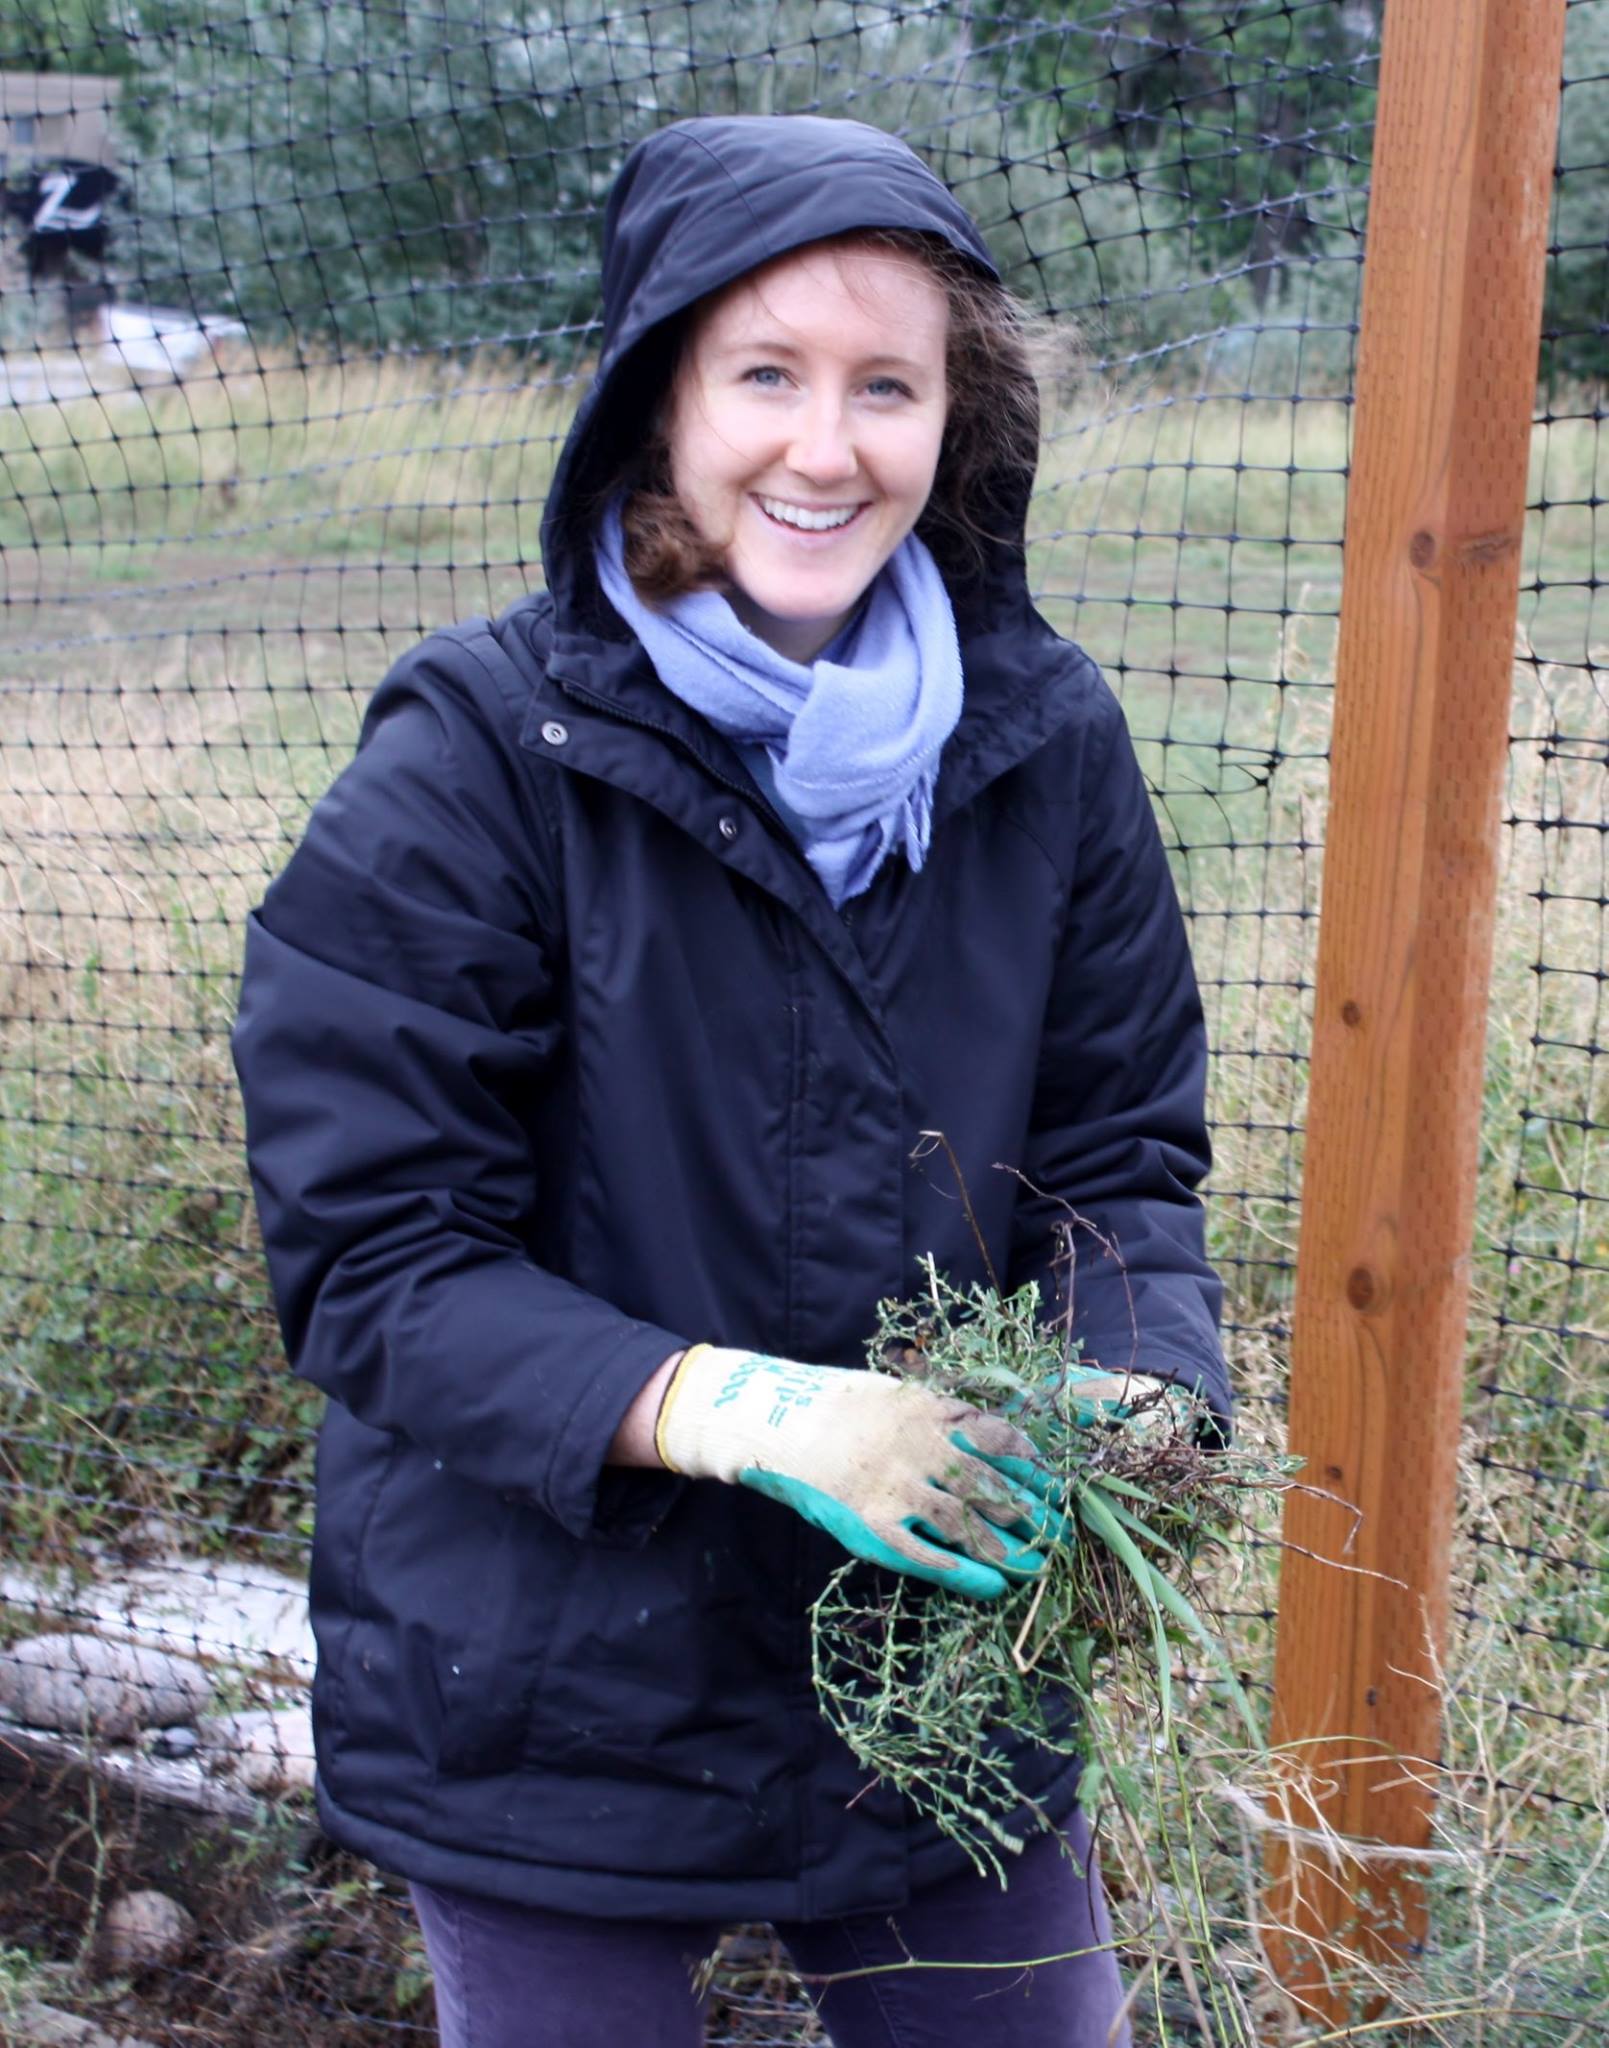 Bridget Johnson weeds at a garden clean-up event in Billings, Montana, part of her work for the AmeriCorps VISTA program in 2014.